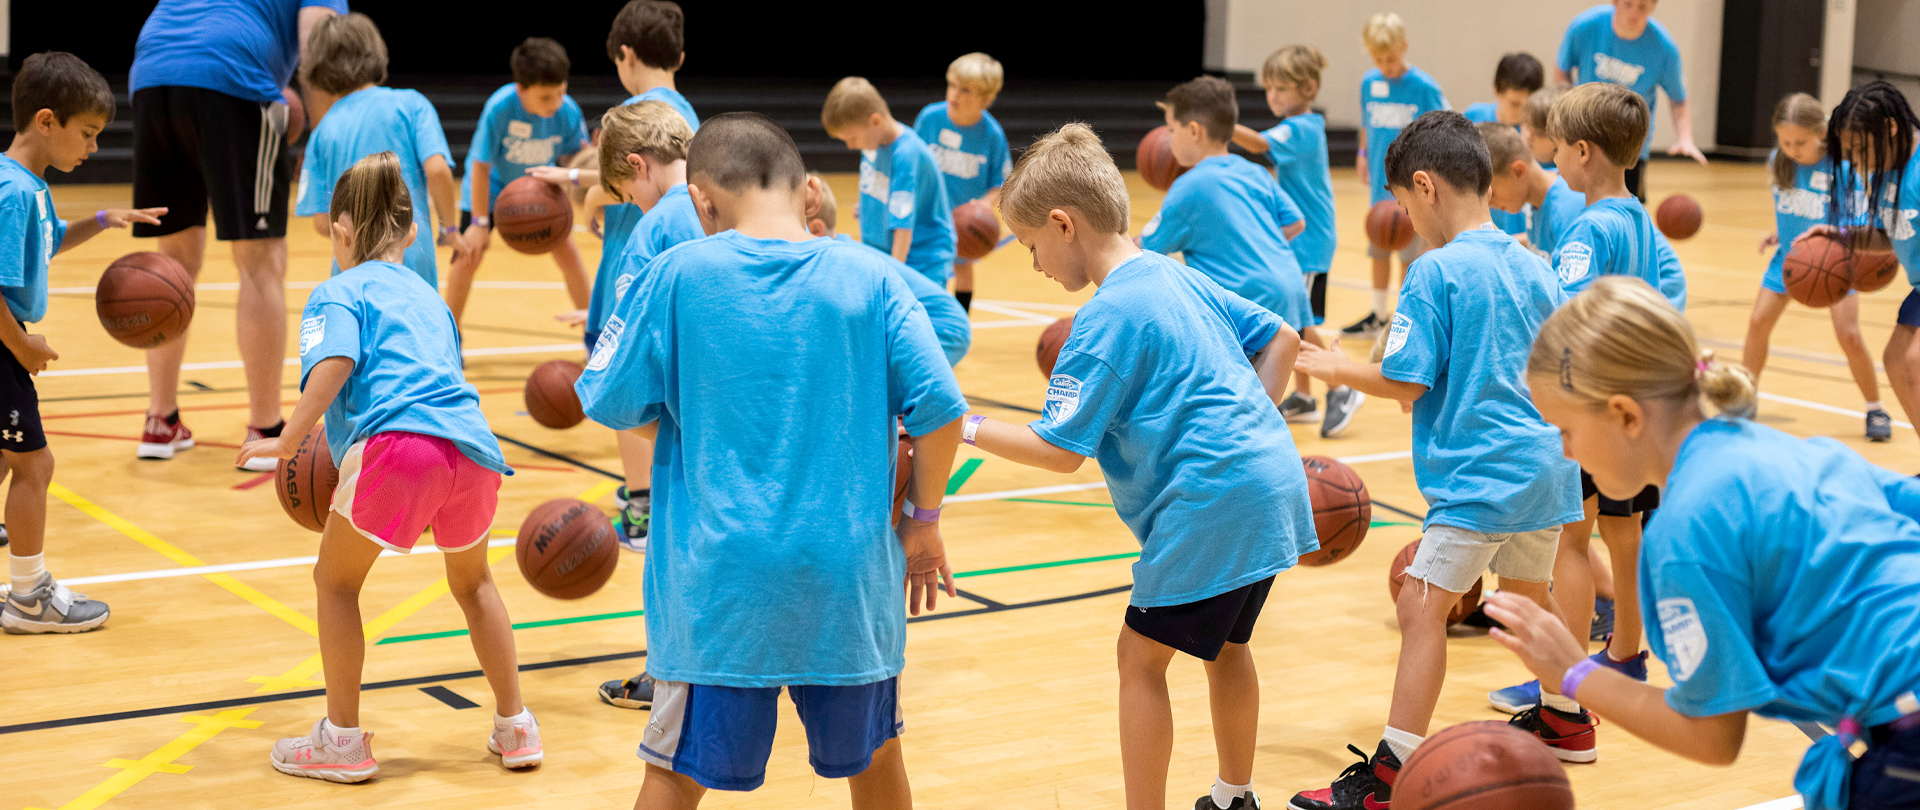 Youth Basketball
CHAMP leagues for ages 5–18
Winter Season: Nov 2022–Feb 2023
Waitlist Forming
